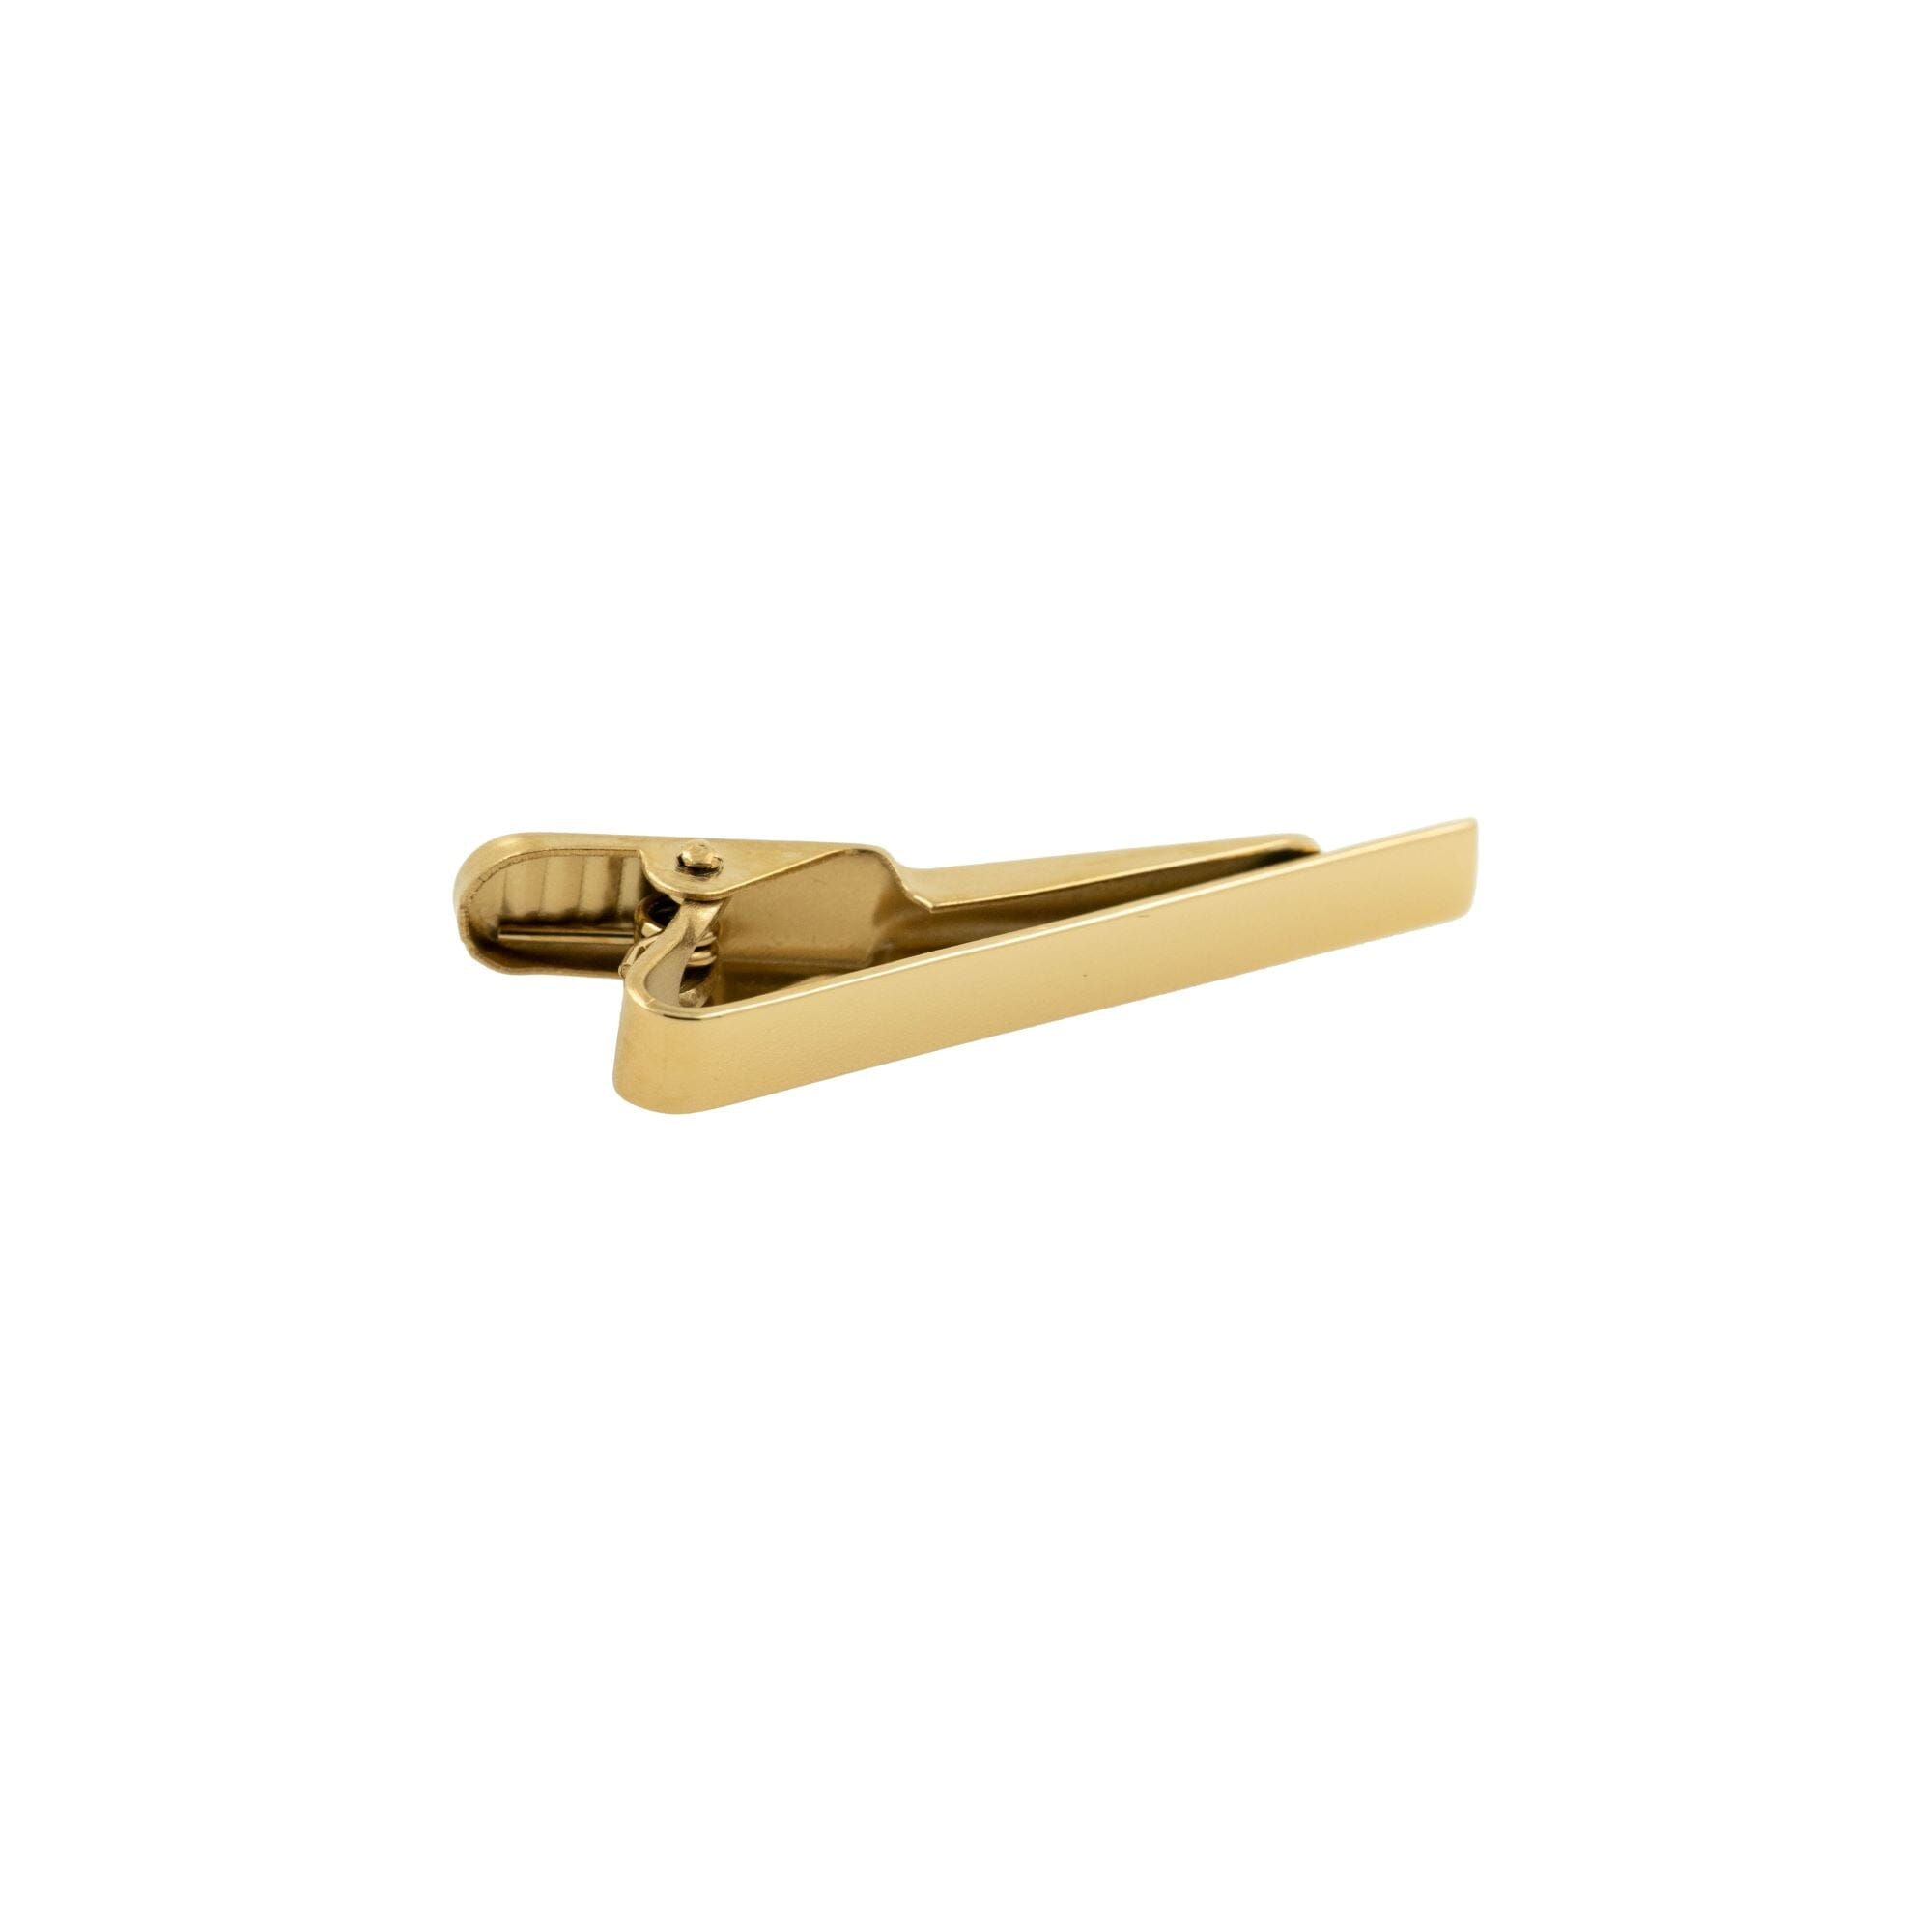 Small Shiny Gold Tie Clip 40mm Tie Clips Clinks 